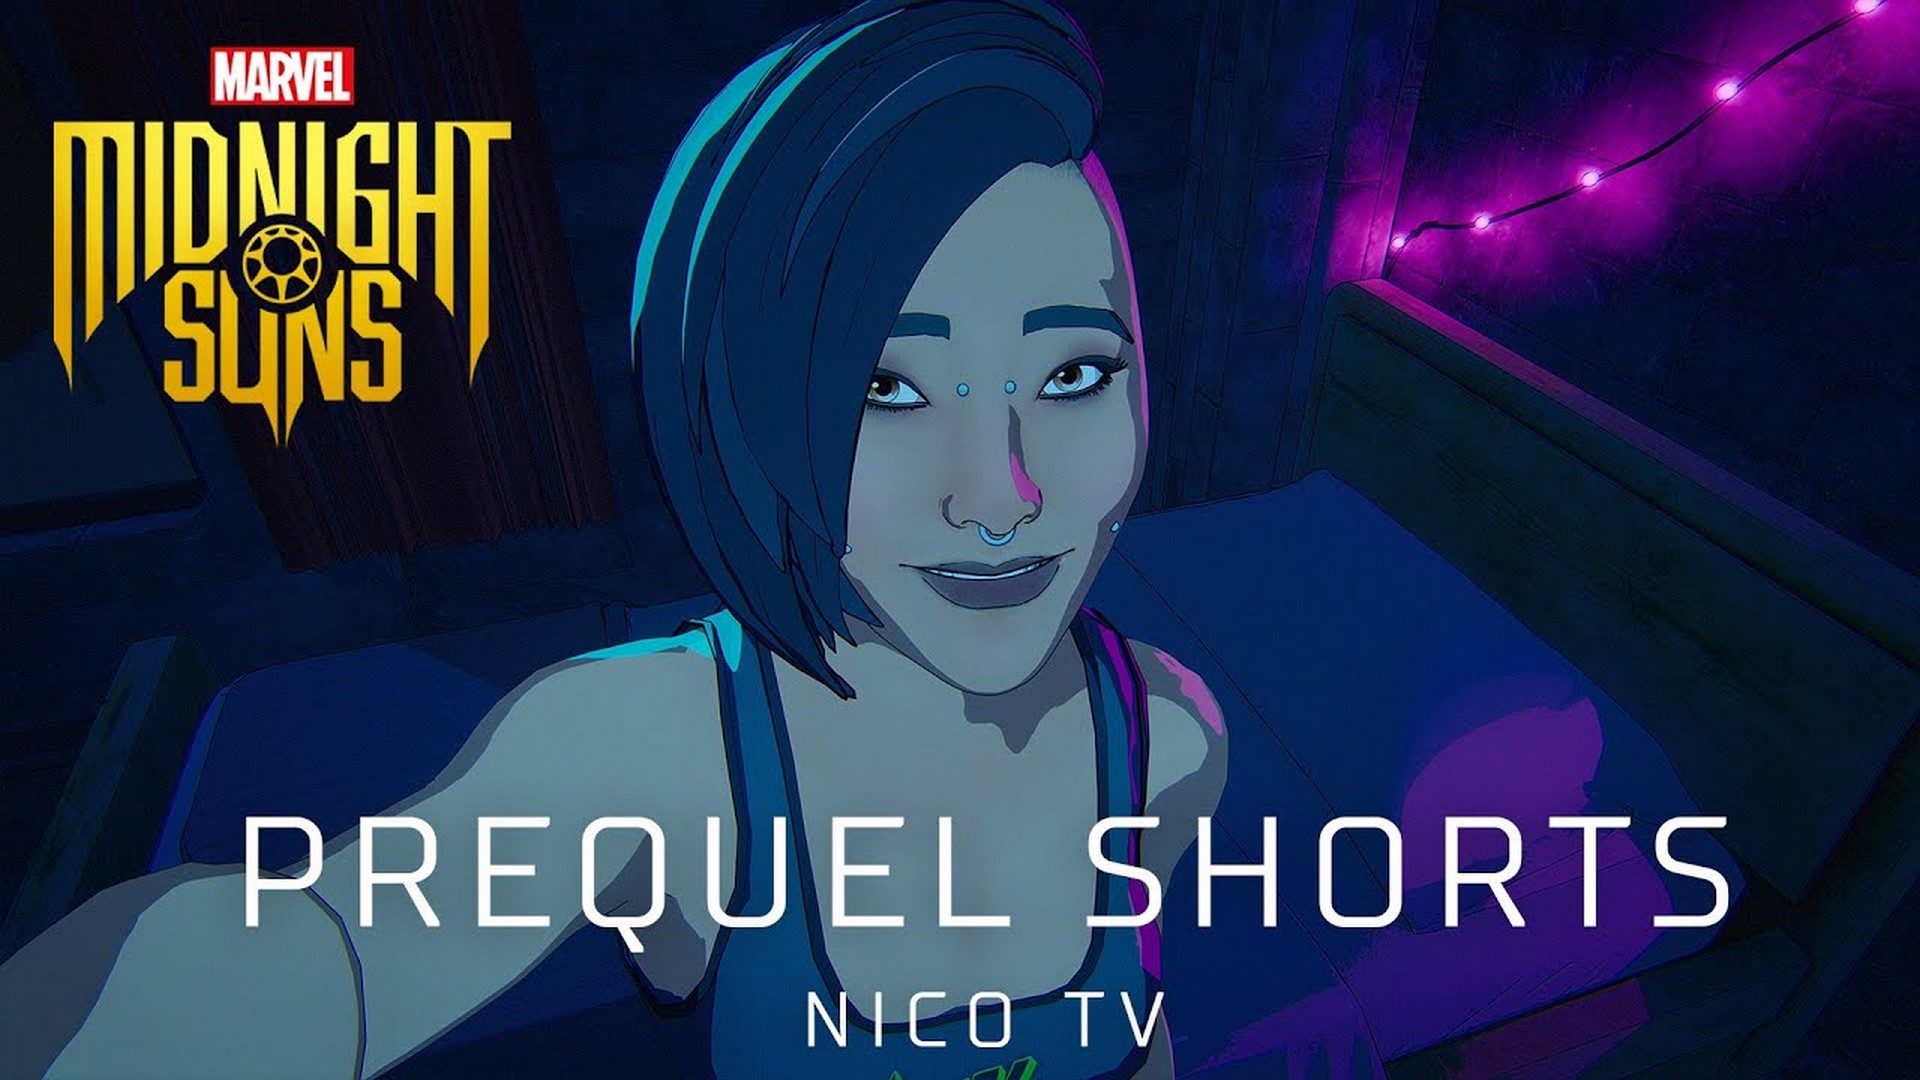 Final Marvel’s Midnight Suns Prequel Short – Nico TV – Available To Watch Now